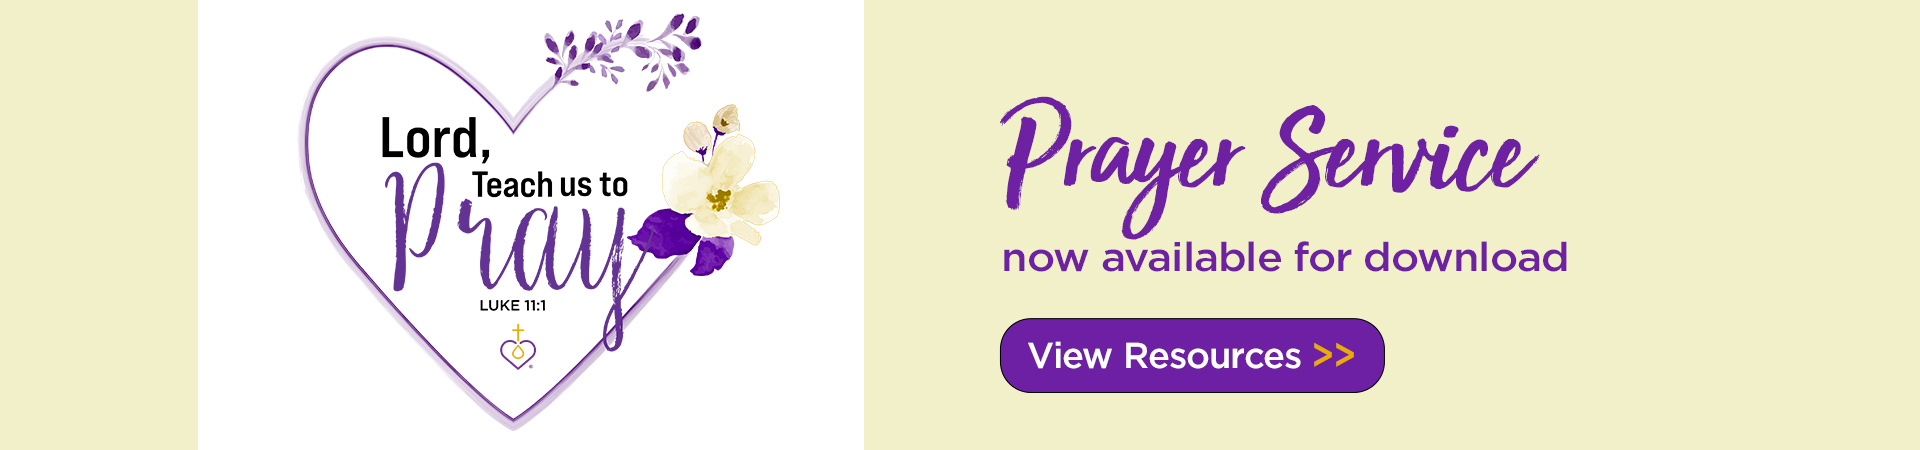 2022 LWML Prayer Service now available. View Resources.